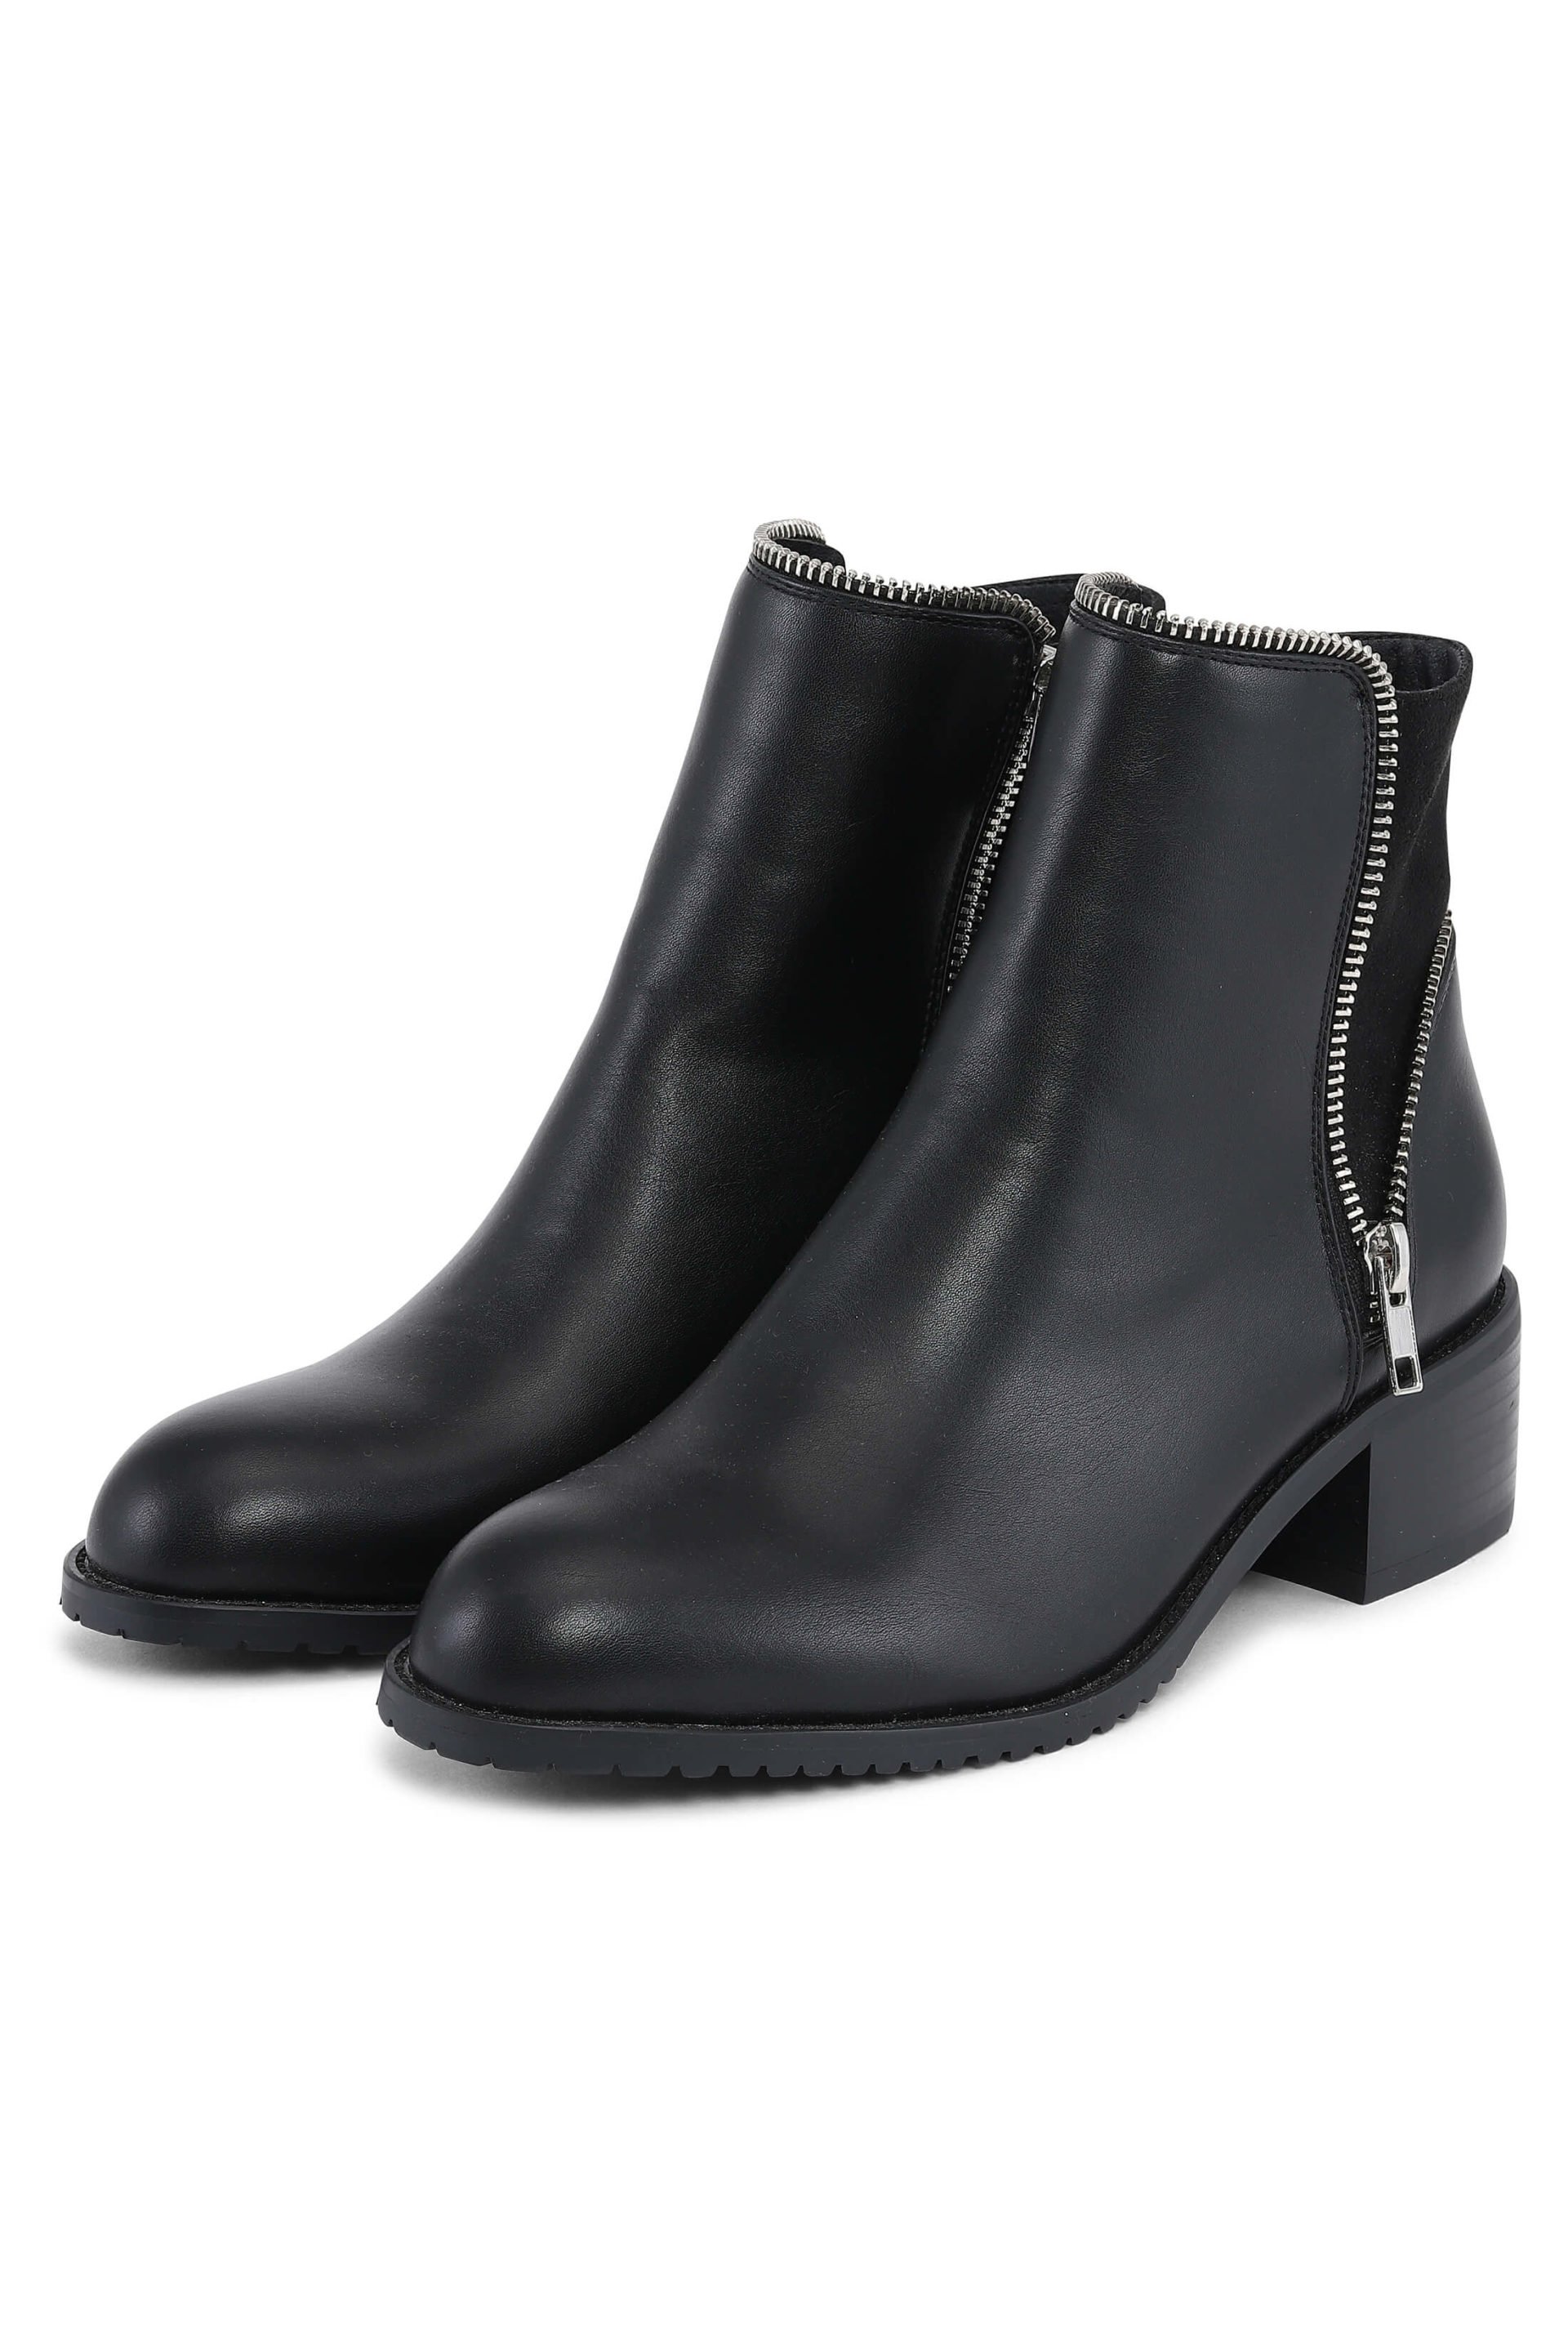 Cool ankleboots with silver-coloured zipper